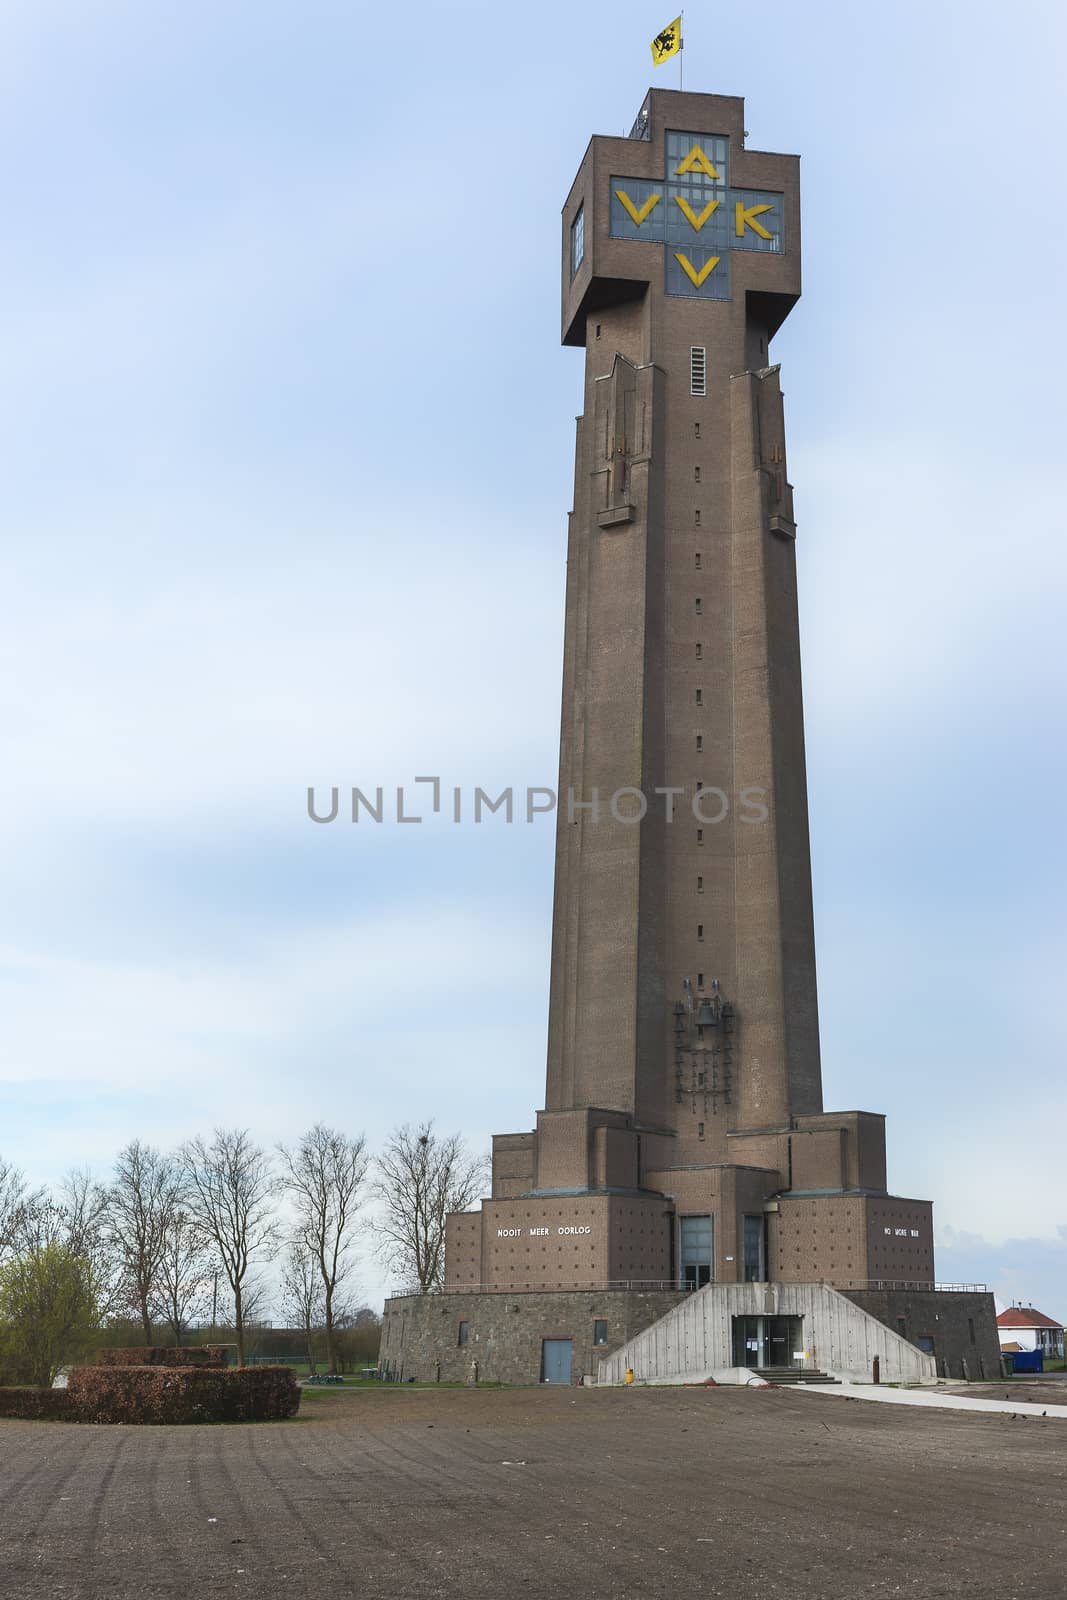 The Ijzertoren, (tower of iron) is the tallest World War I and peace memorial in Flanders, Belgium. In Diksmuide near Ypres along the Yser River. AVV-VVK stands for "All for Flanders, Flanders for Christ." The white characters at the bottom read "Never Again War" in two languages.